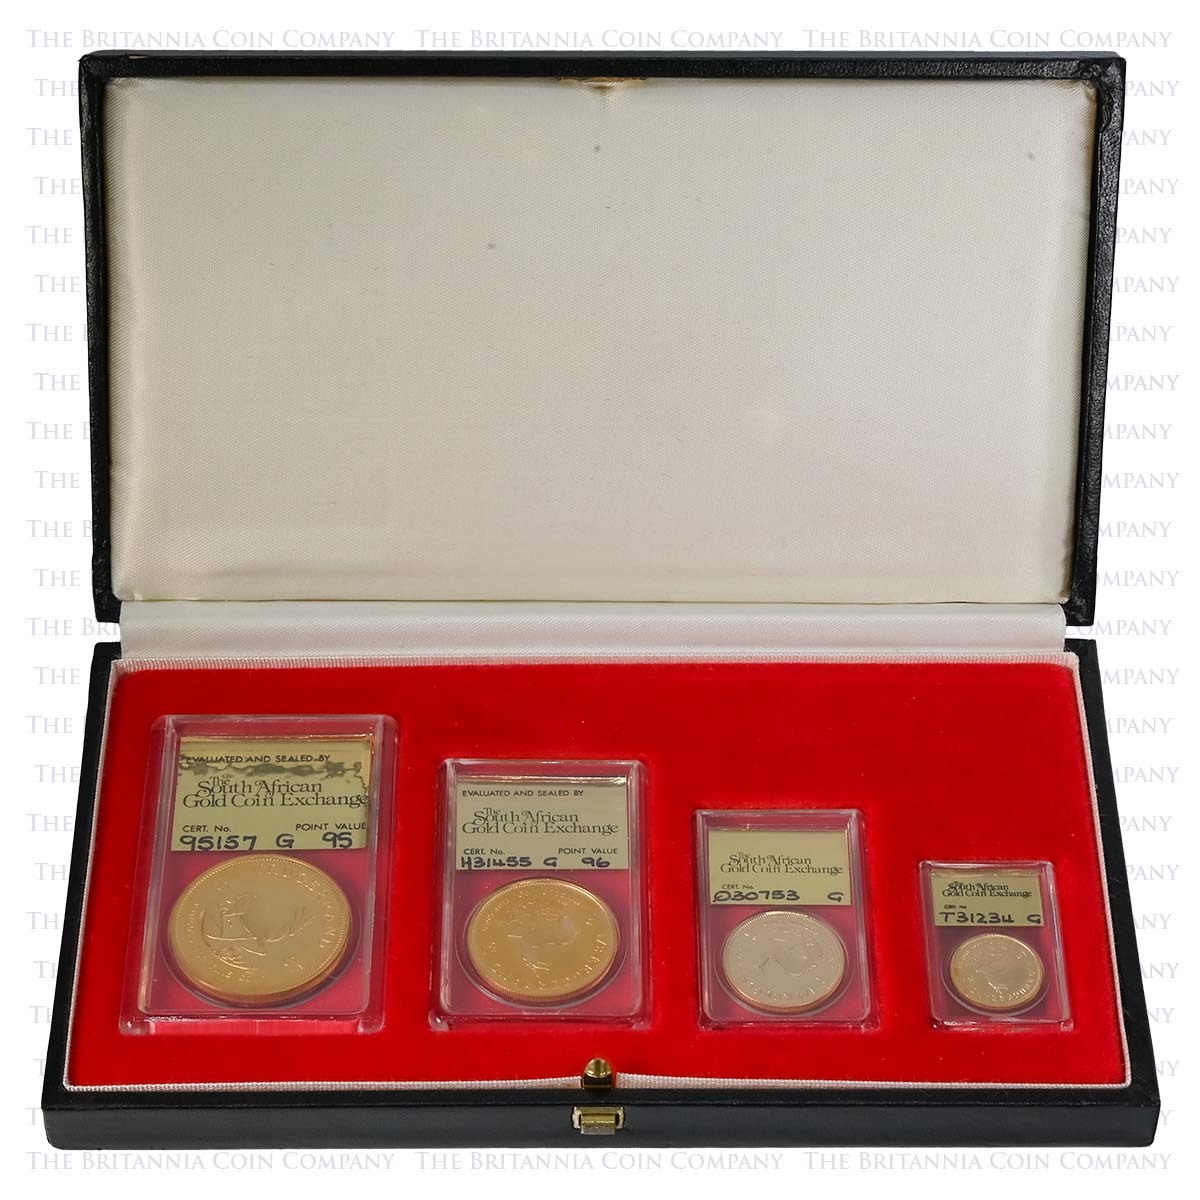 1987 4 Coin Gold Proof Krugerrand Set Boxed